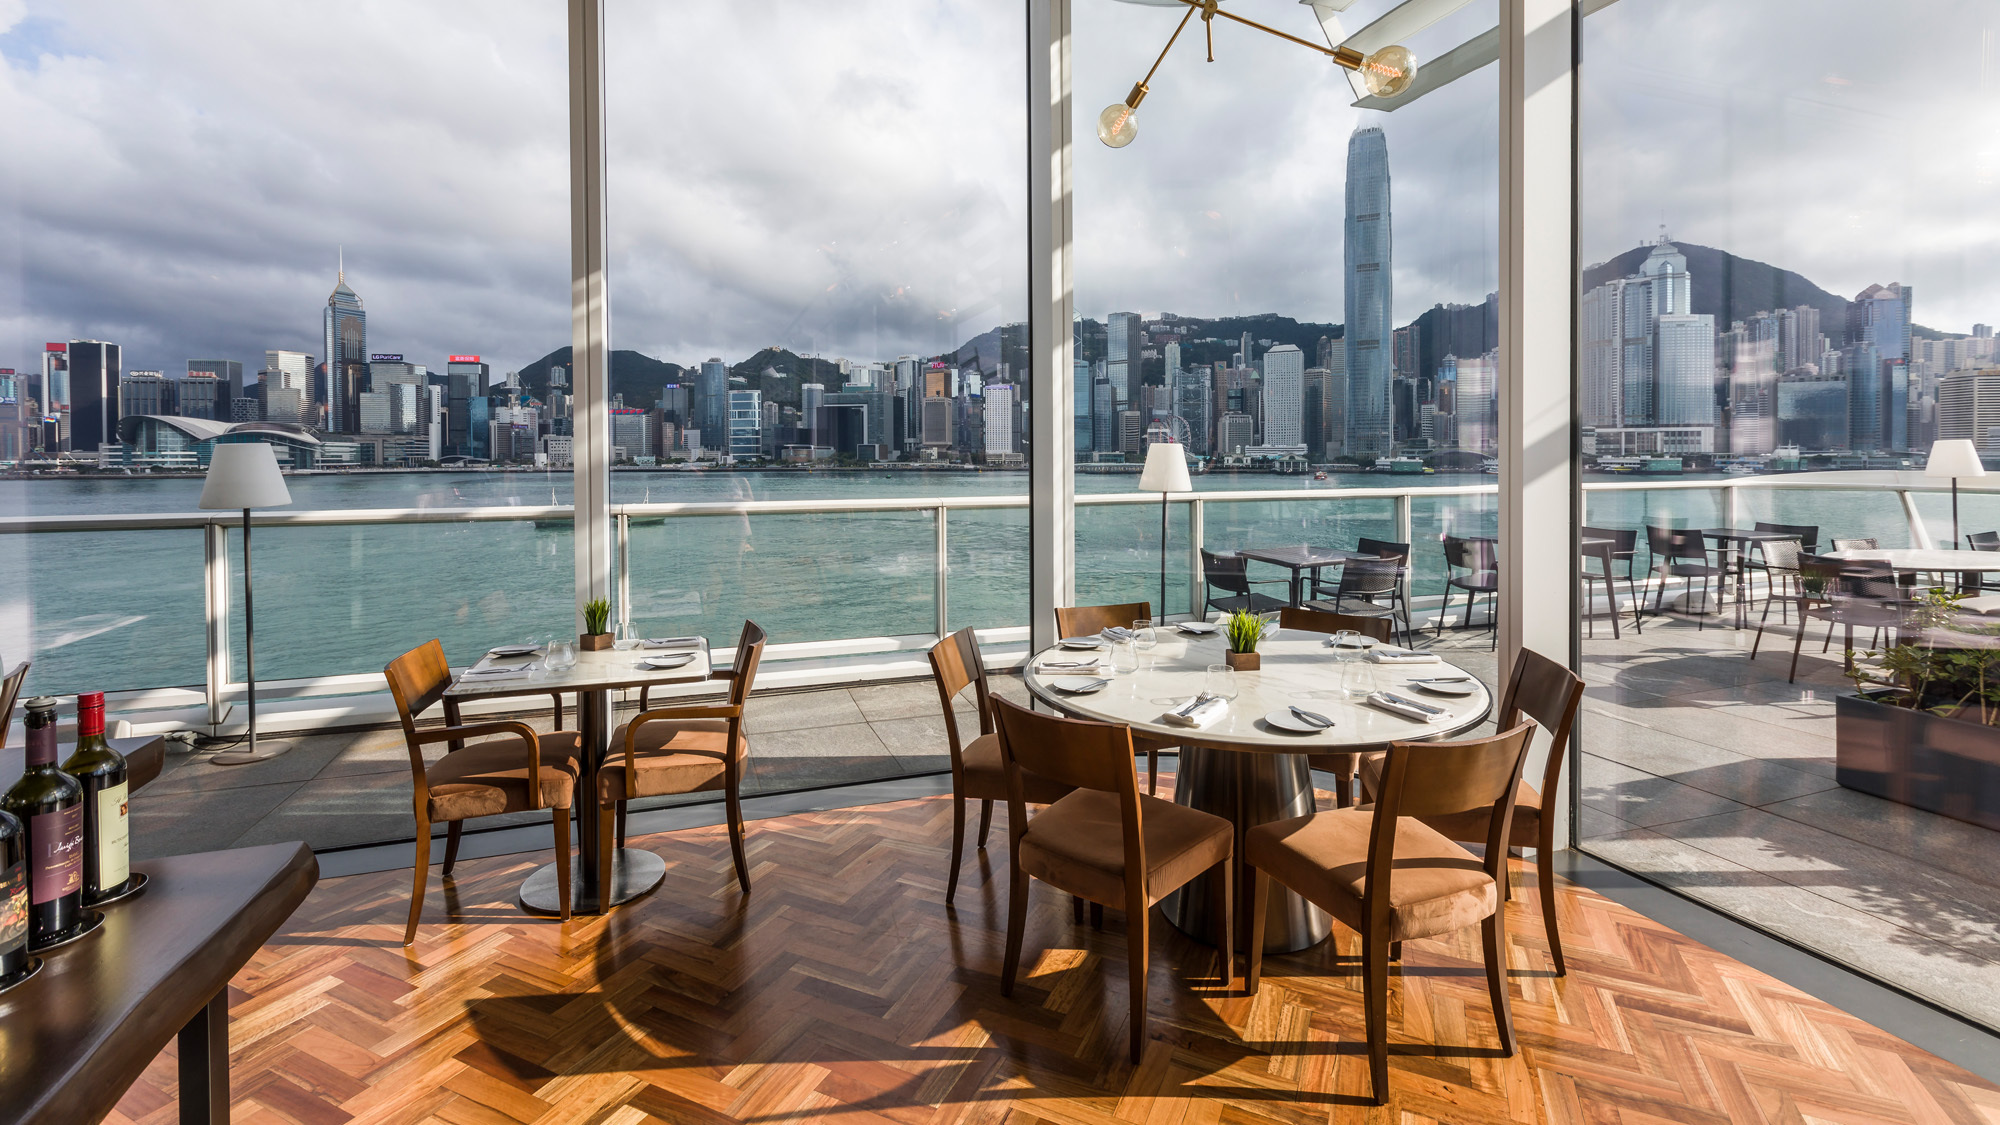 Combining stunning panoramic views and alfresco dining, Harbourside Grill offers a refined culinary experience.